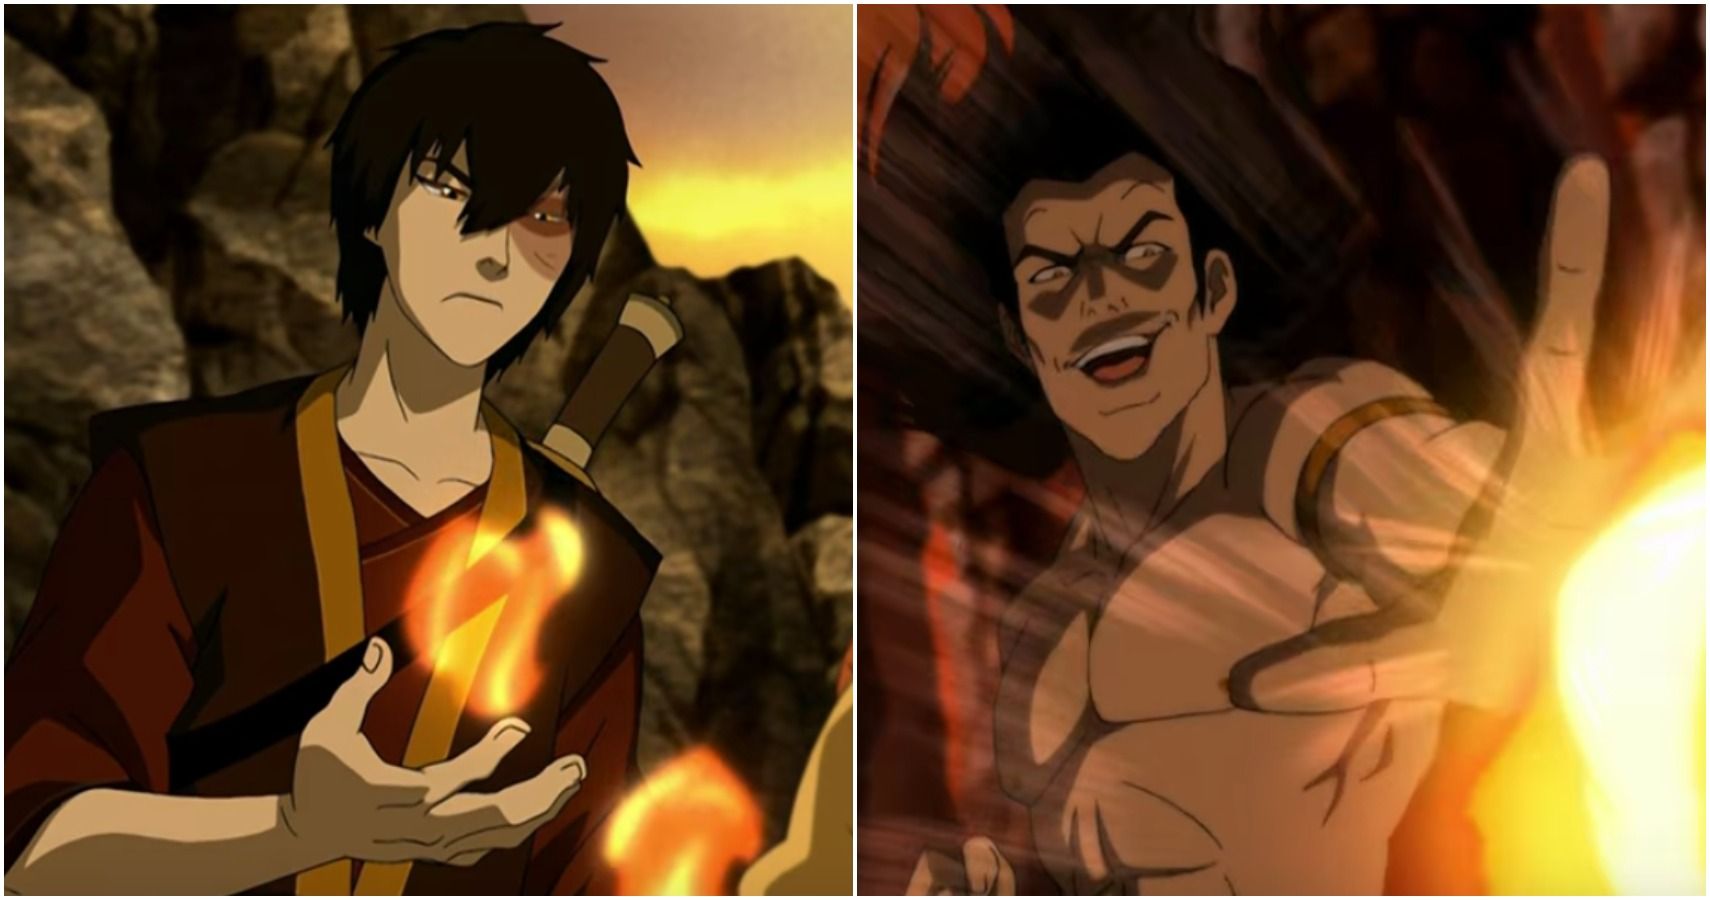 Zuko and Ozai side by side from The Last Airbender